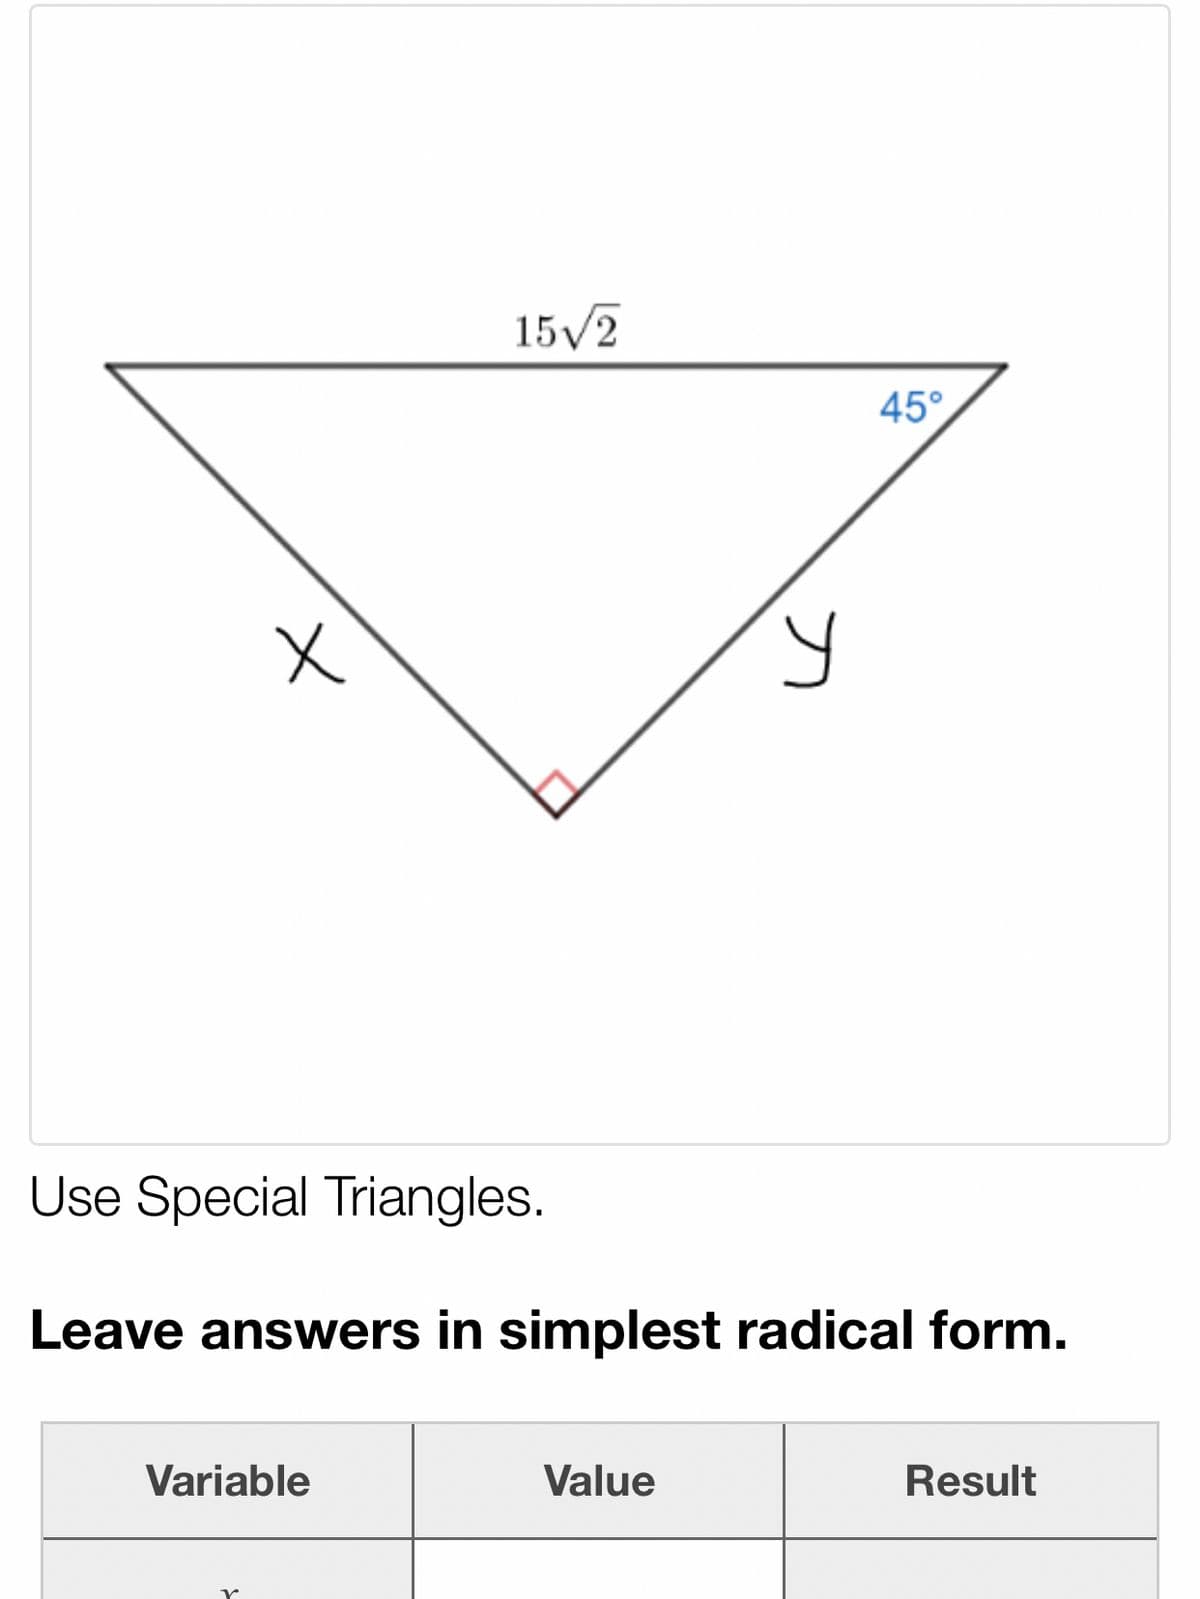 15/2
45°
Use Special Triangles.
Leave answers in simplest radical form.
Variable
Value
Result
